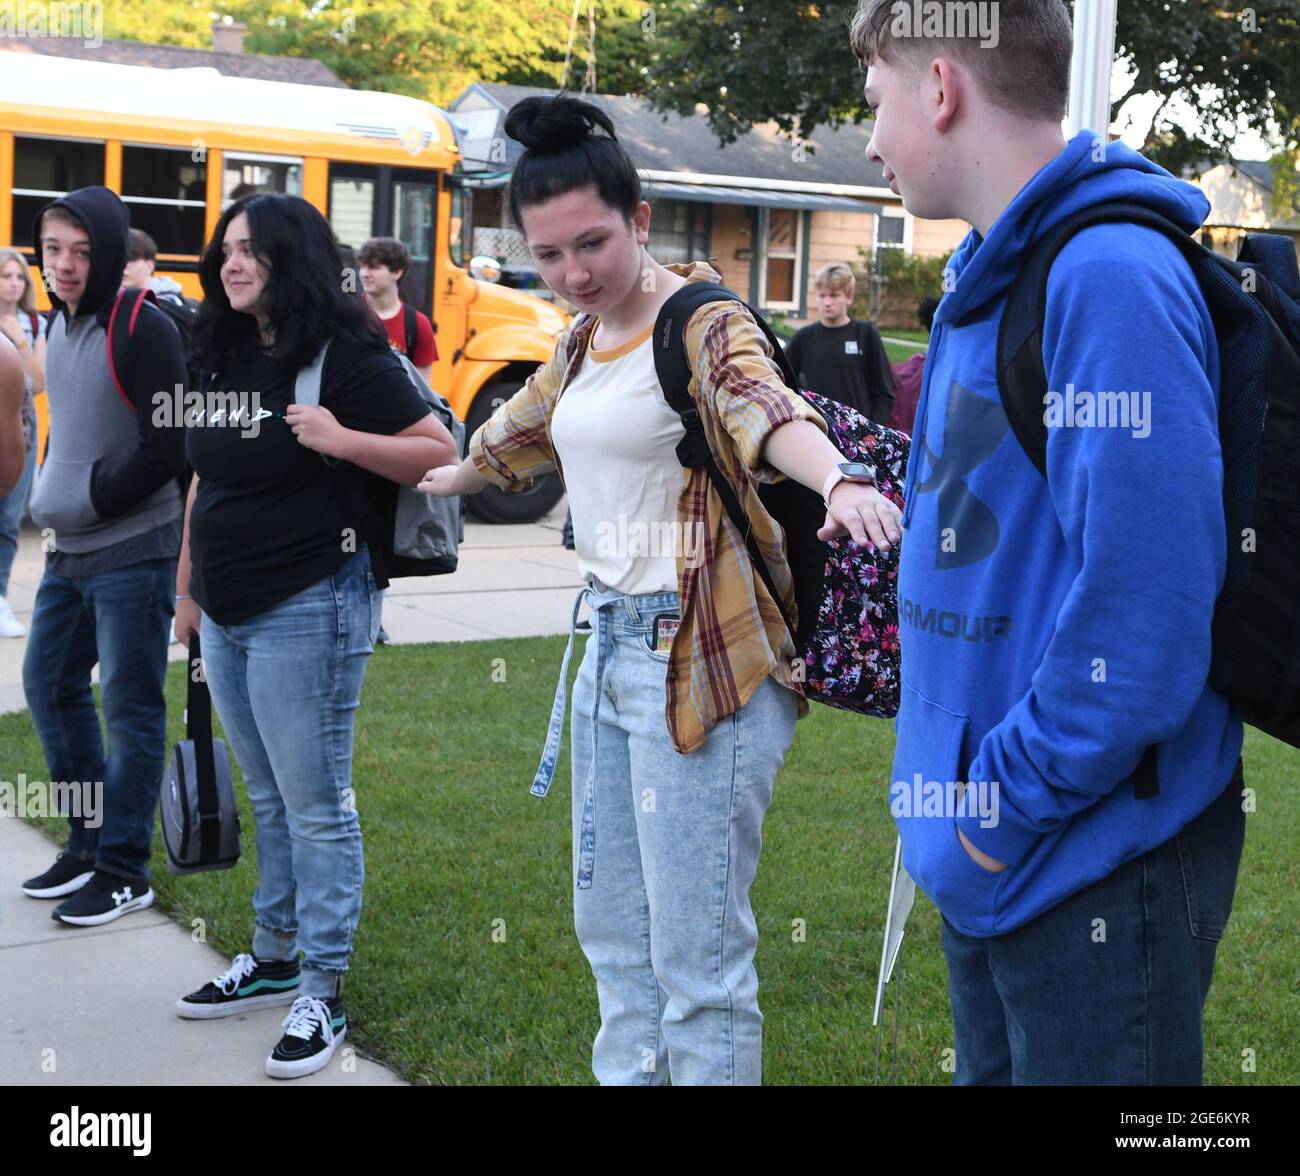 Racine, Wisconsin, USA. 17th Aug, 2021. ALLISON KNUE spreads her arms when students are asked to be six feet apart when they arrive for the first day of school at Racine Lutheran High School in Racine, Wisconsin Tuesday August 17, 2021. Students are required to be masked on school buses, but in-school masking decisions are left to studentsÃ¢â‚¬â„¢ parents. The school was party to a lawsuit last year contesting the city health departmentÃ¢â‚¬â„¢s decision to close schools. The Wisconsin Supreme Court ruled that the health department did not have the right to do so. (Credit Image: © Mark Hertzb Stock Photo